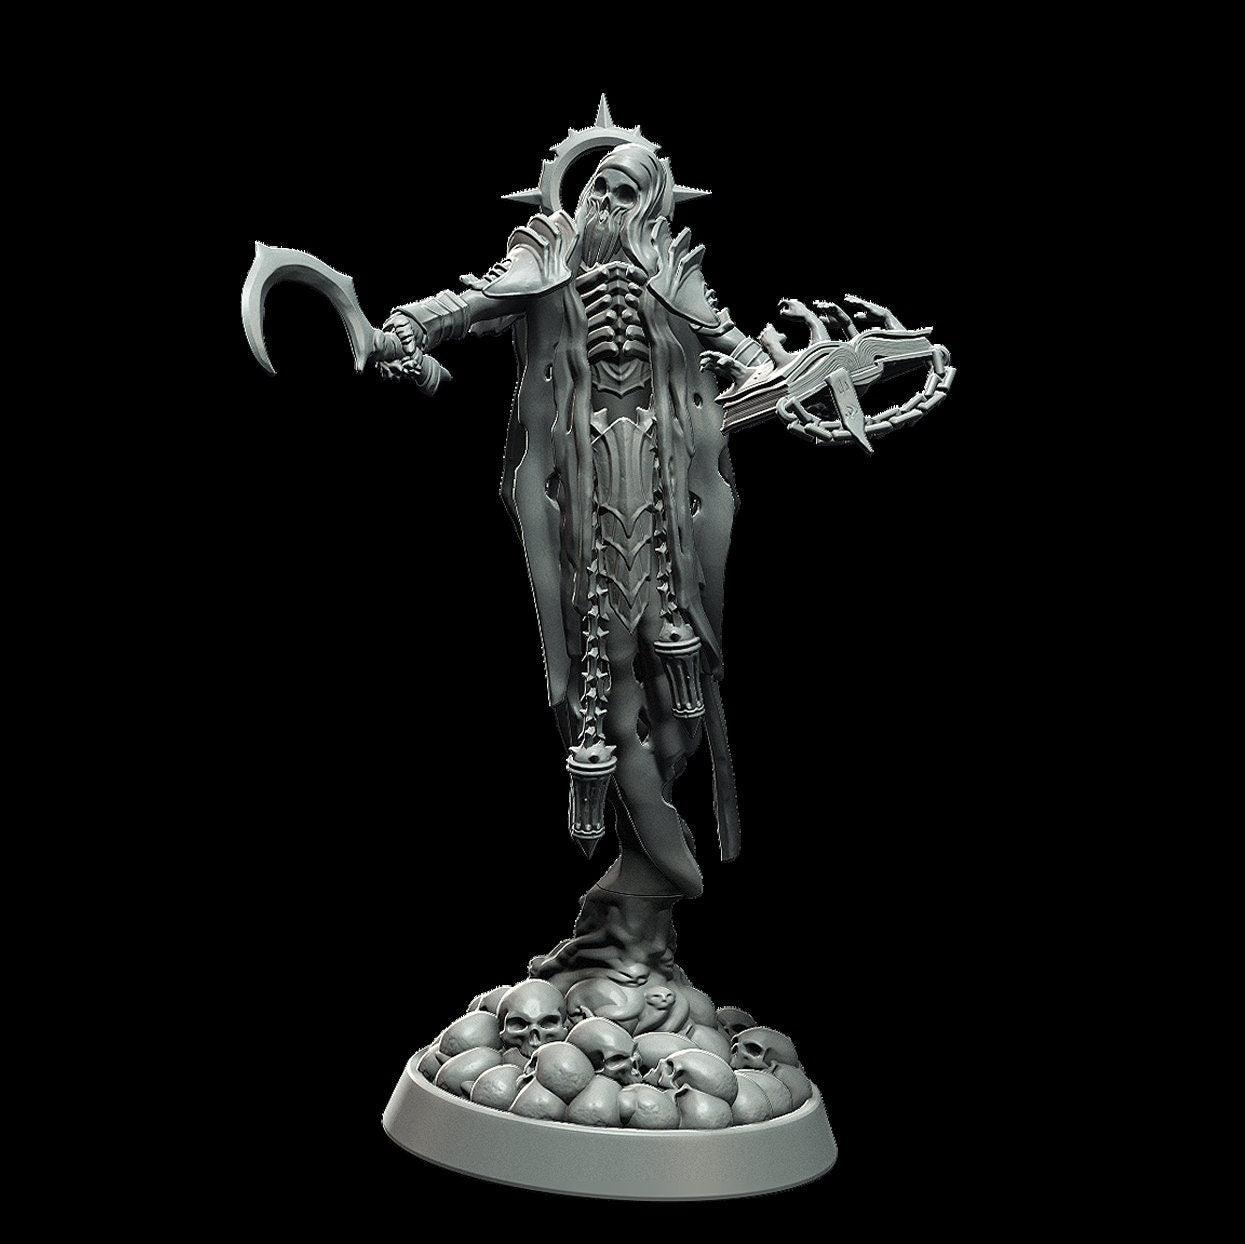 Necromancer Miniature Skeleton Miniature Undead Miniature - 3 Poses - 28mm scale Tabletop gaming DnD Miniature Dungeons and Dragons,dnd 5e - Plague Miniatures shop for DnD Miniatures